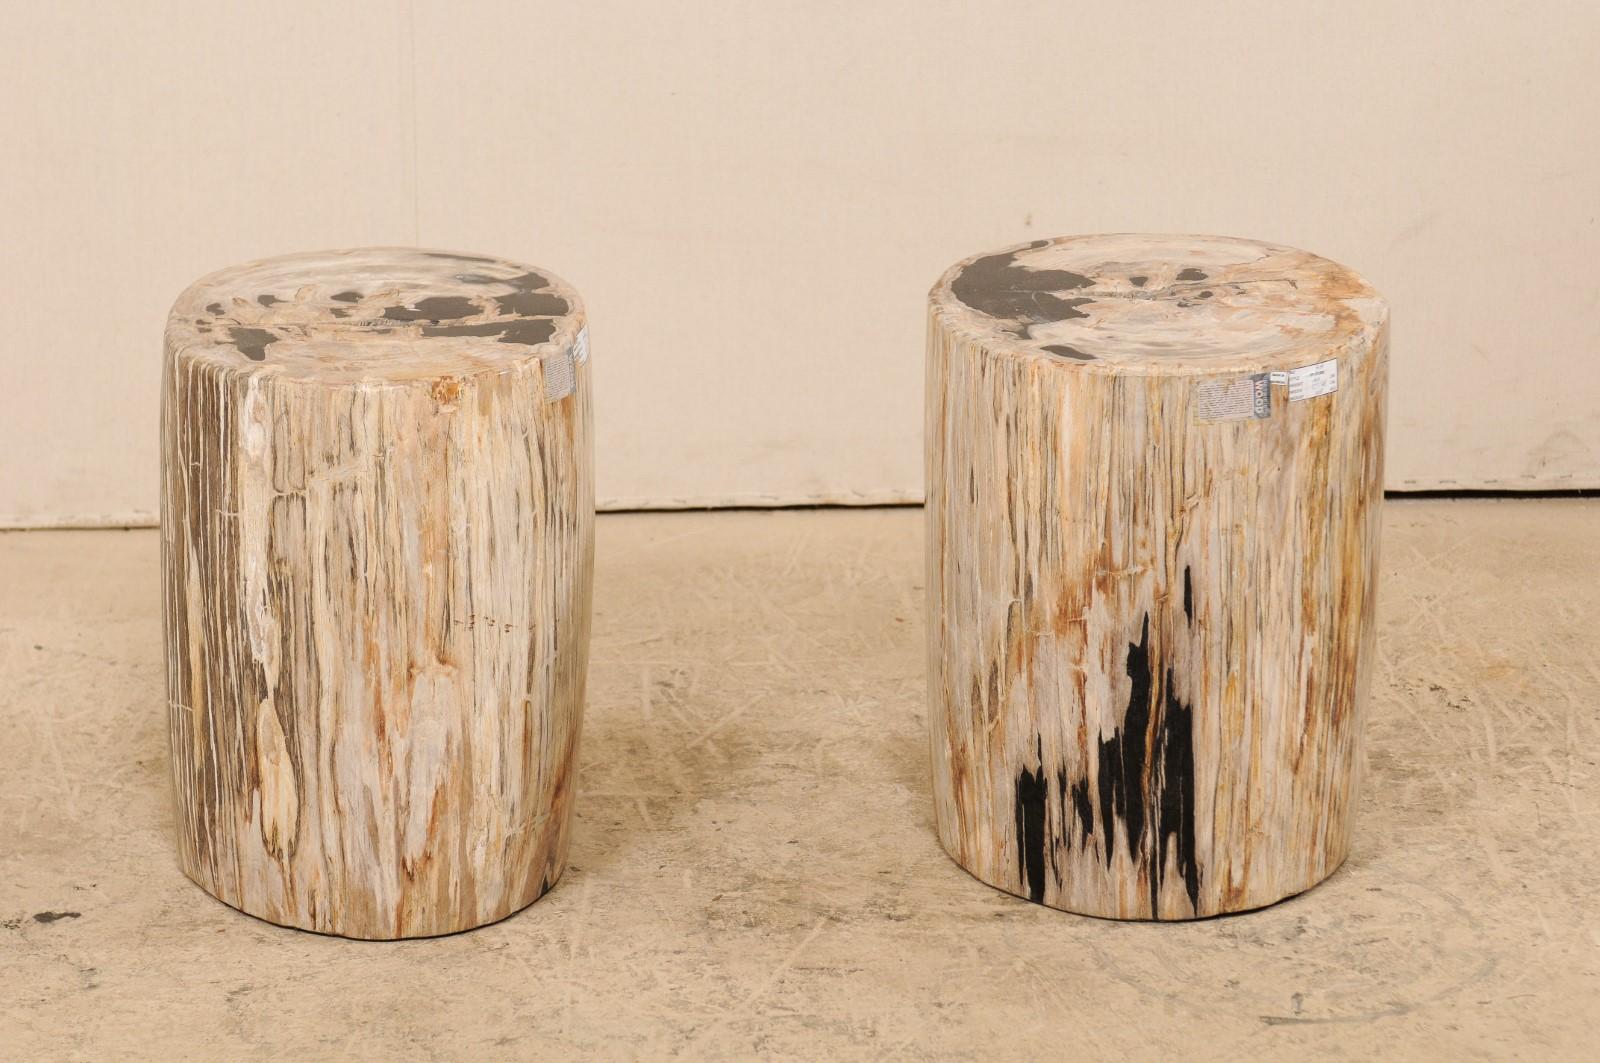 Rustic Pair of Petrified Wood Side Tables or Stools in Beautiful Cream and Black Colors